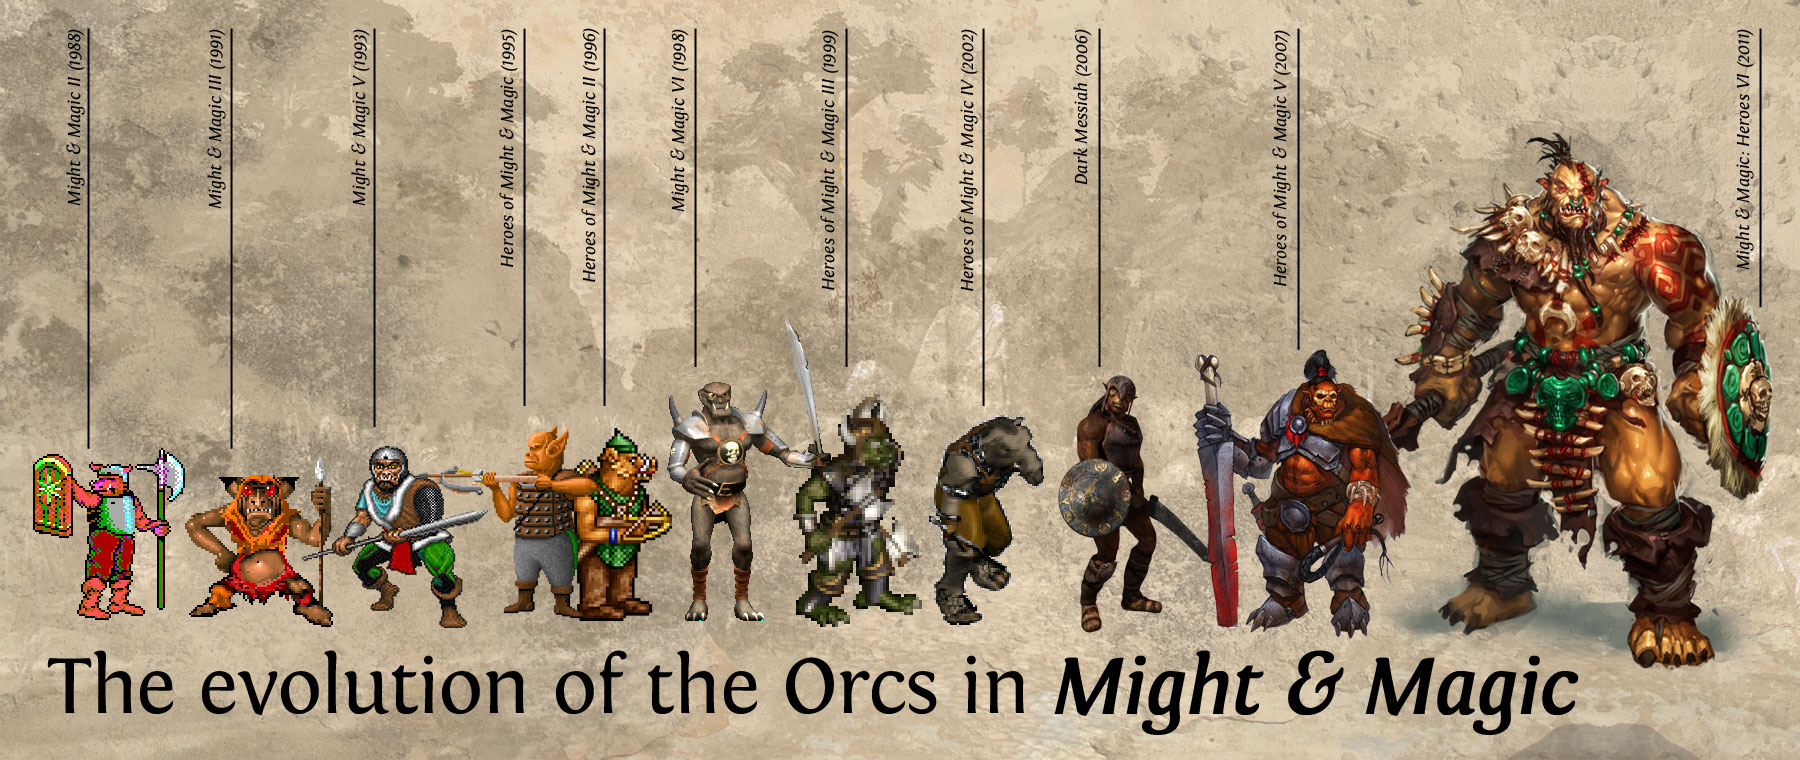 history-of-the-orcs_v2